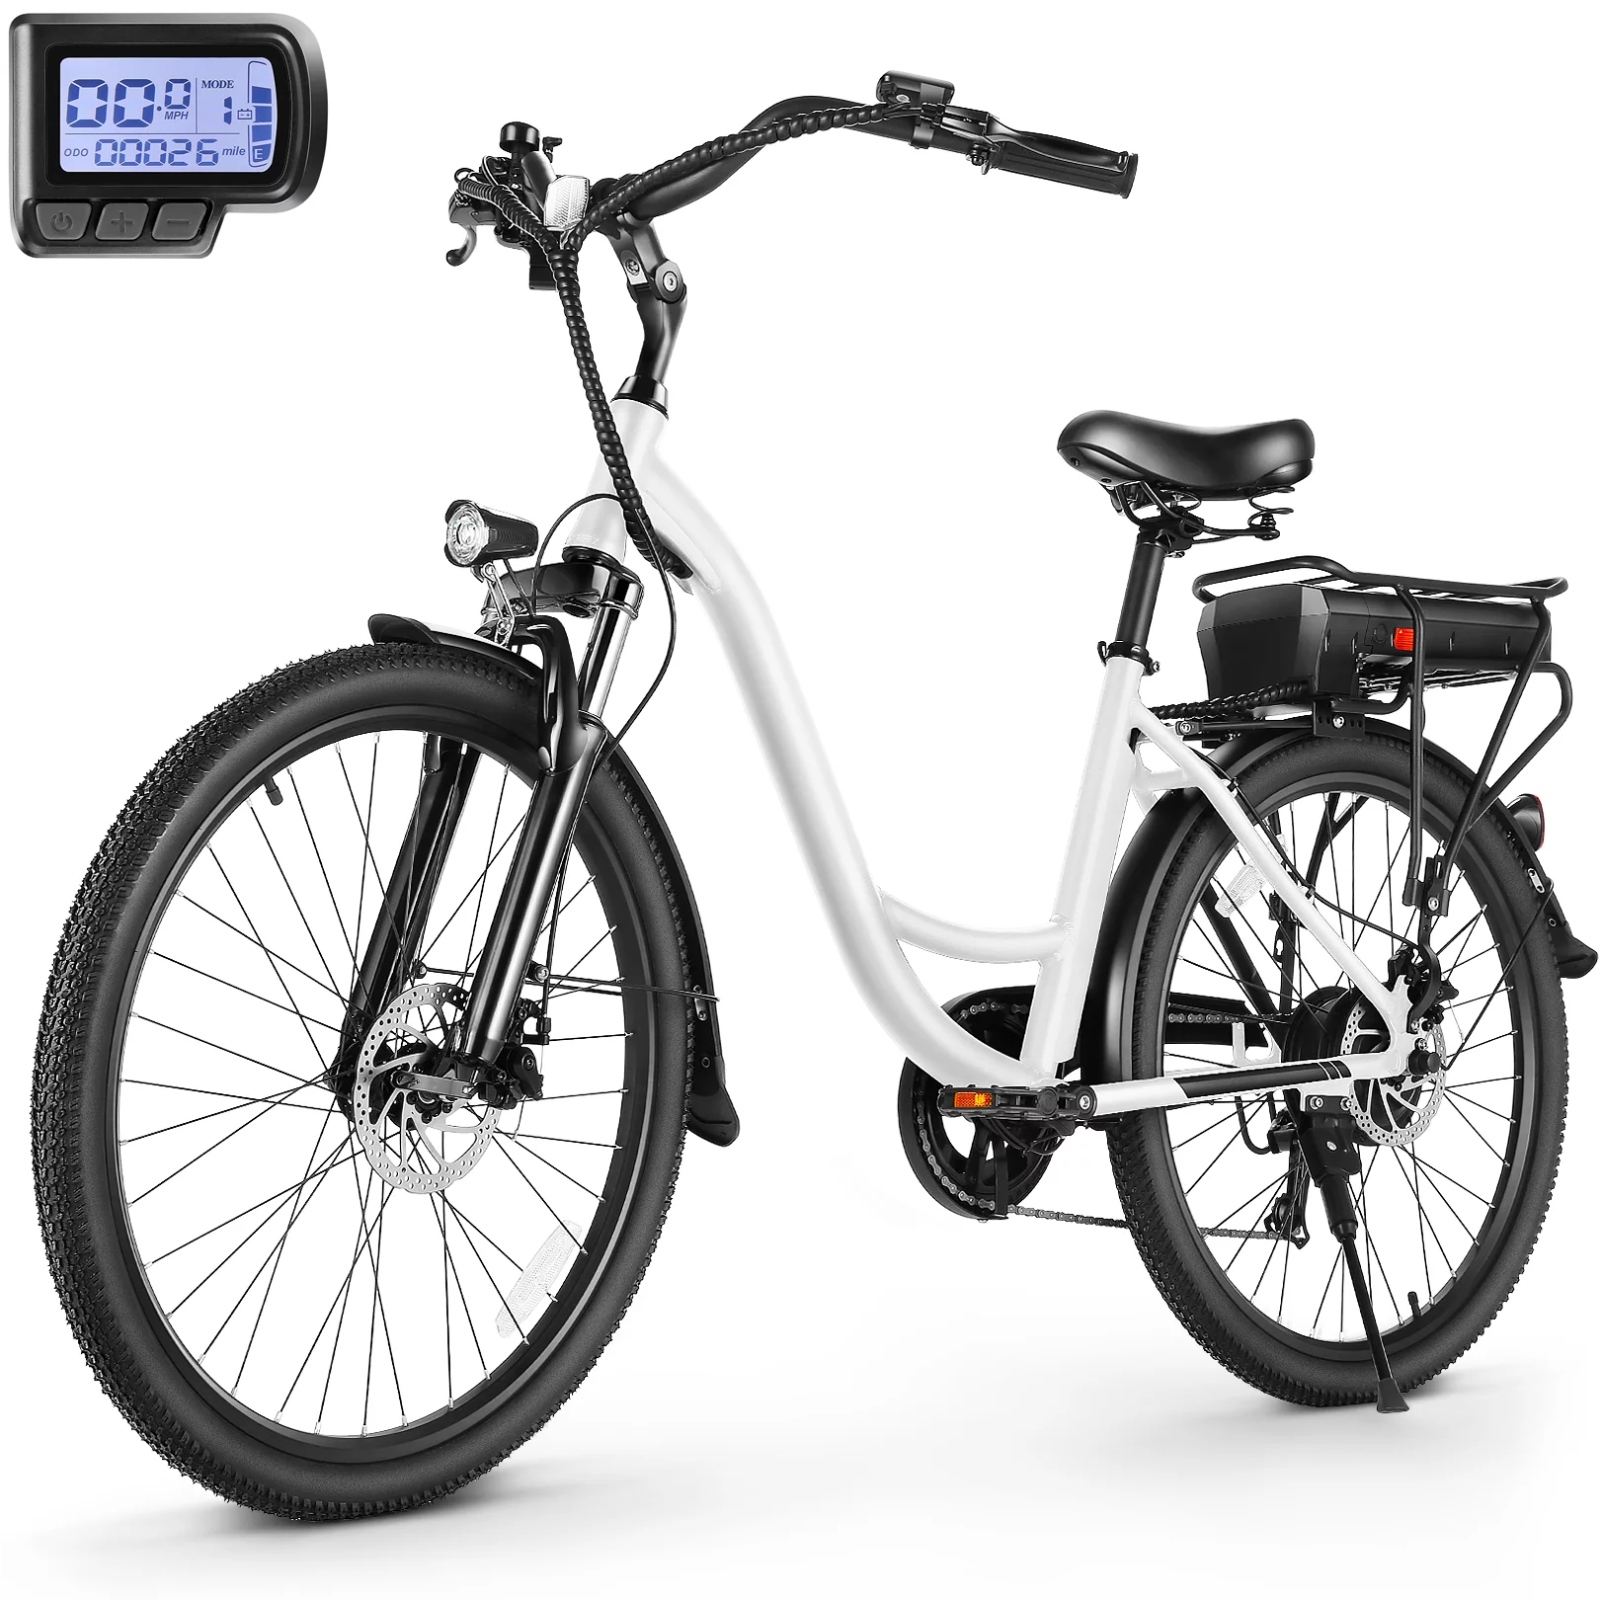 Electric Bike, 26" x 4" Fat Tire Electric Bike for Adults 500W 19.8MPH Electric Mountain Bicycle Snow Beach Ebike, 48V 10.4Ah Battery, Lockable Suspension Fork, LCD Display, Fast Charge, Red - image 8 of 16